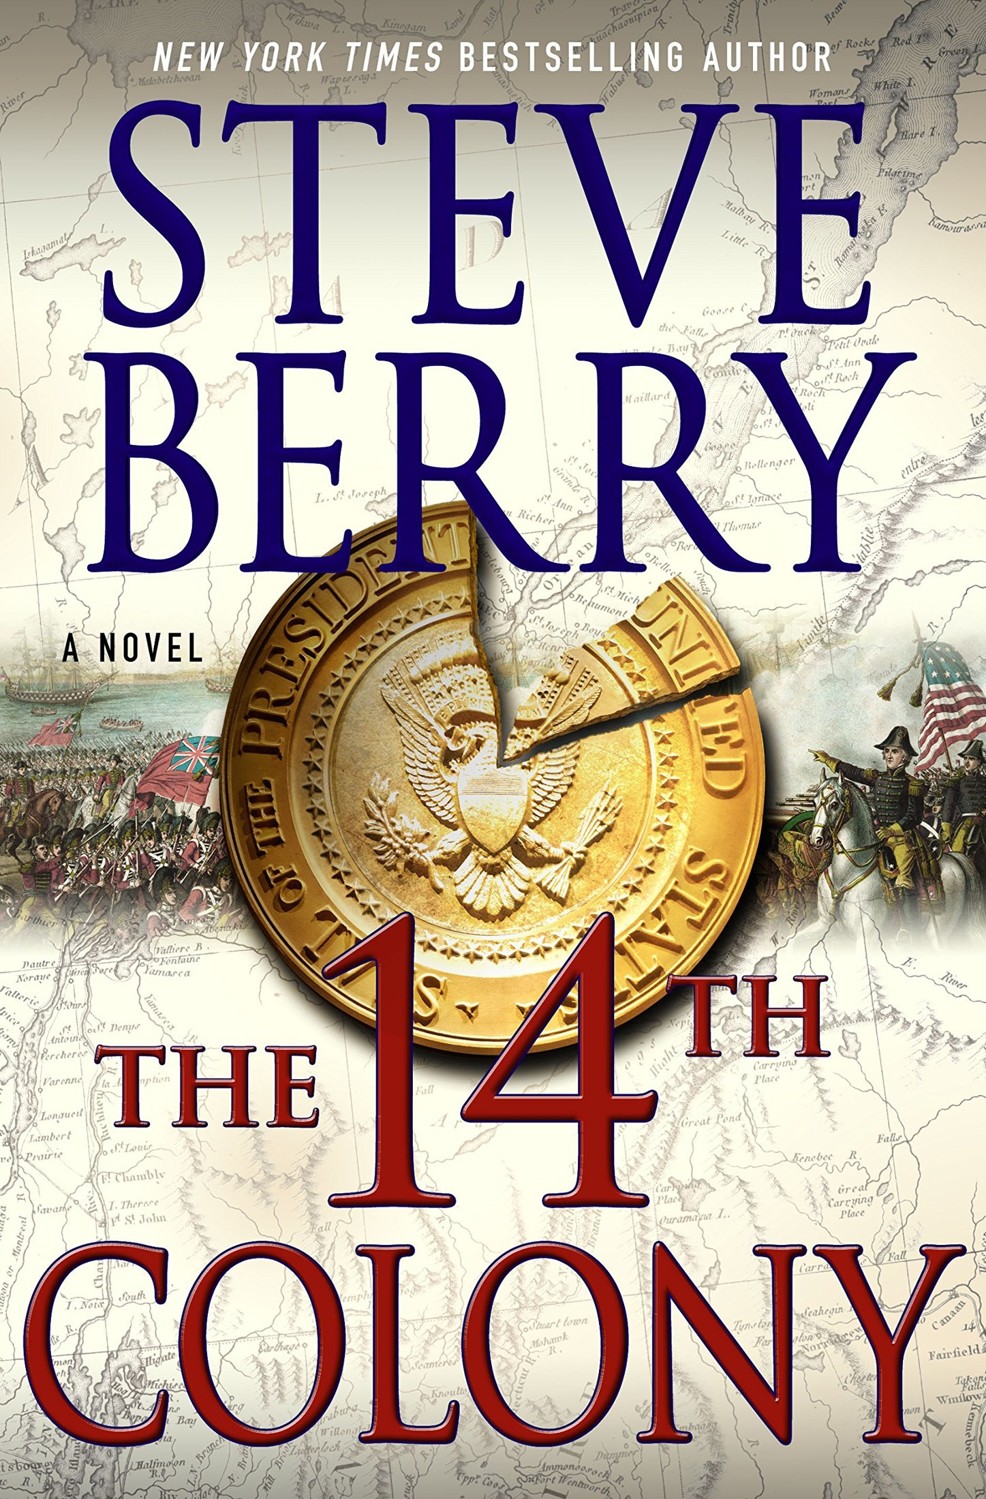 The 14th Colony: A Novel by Steve Berry